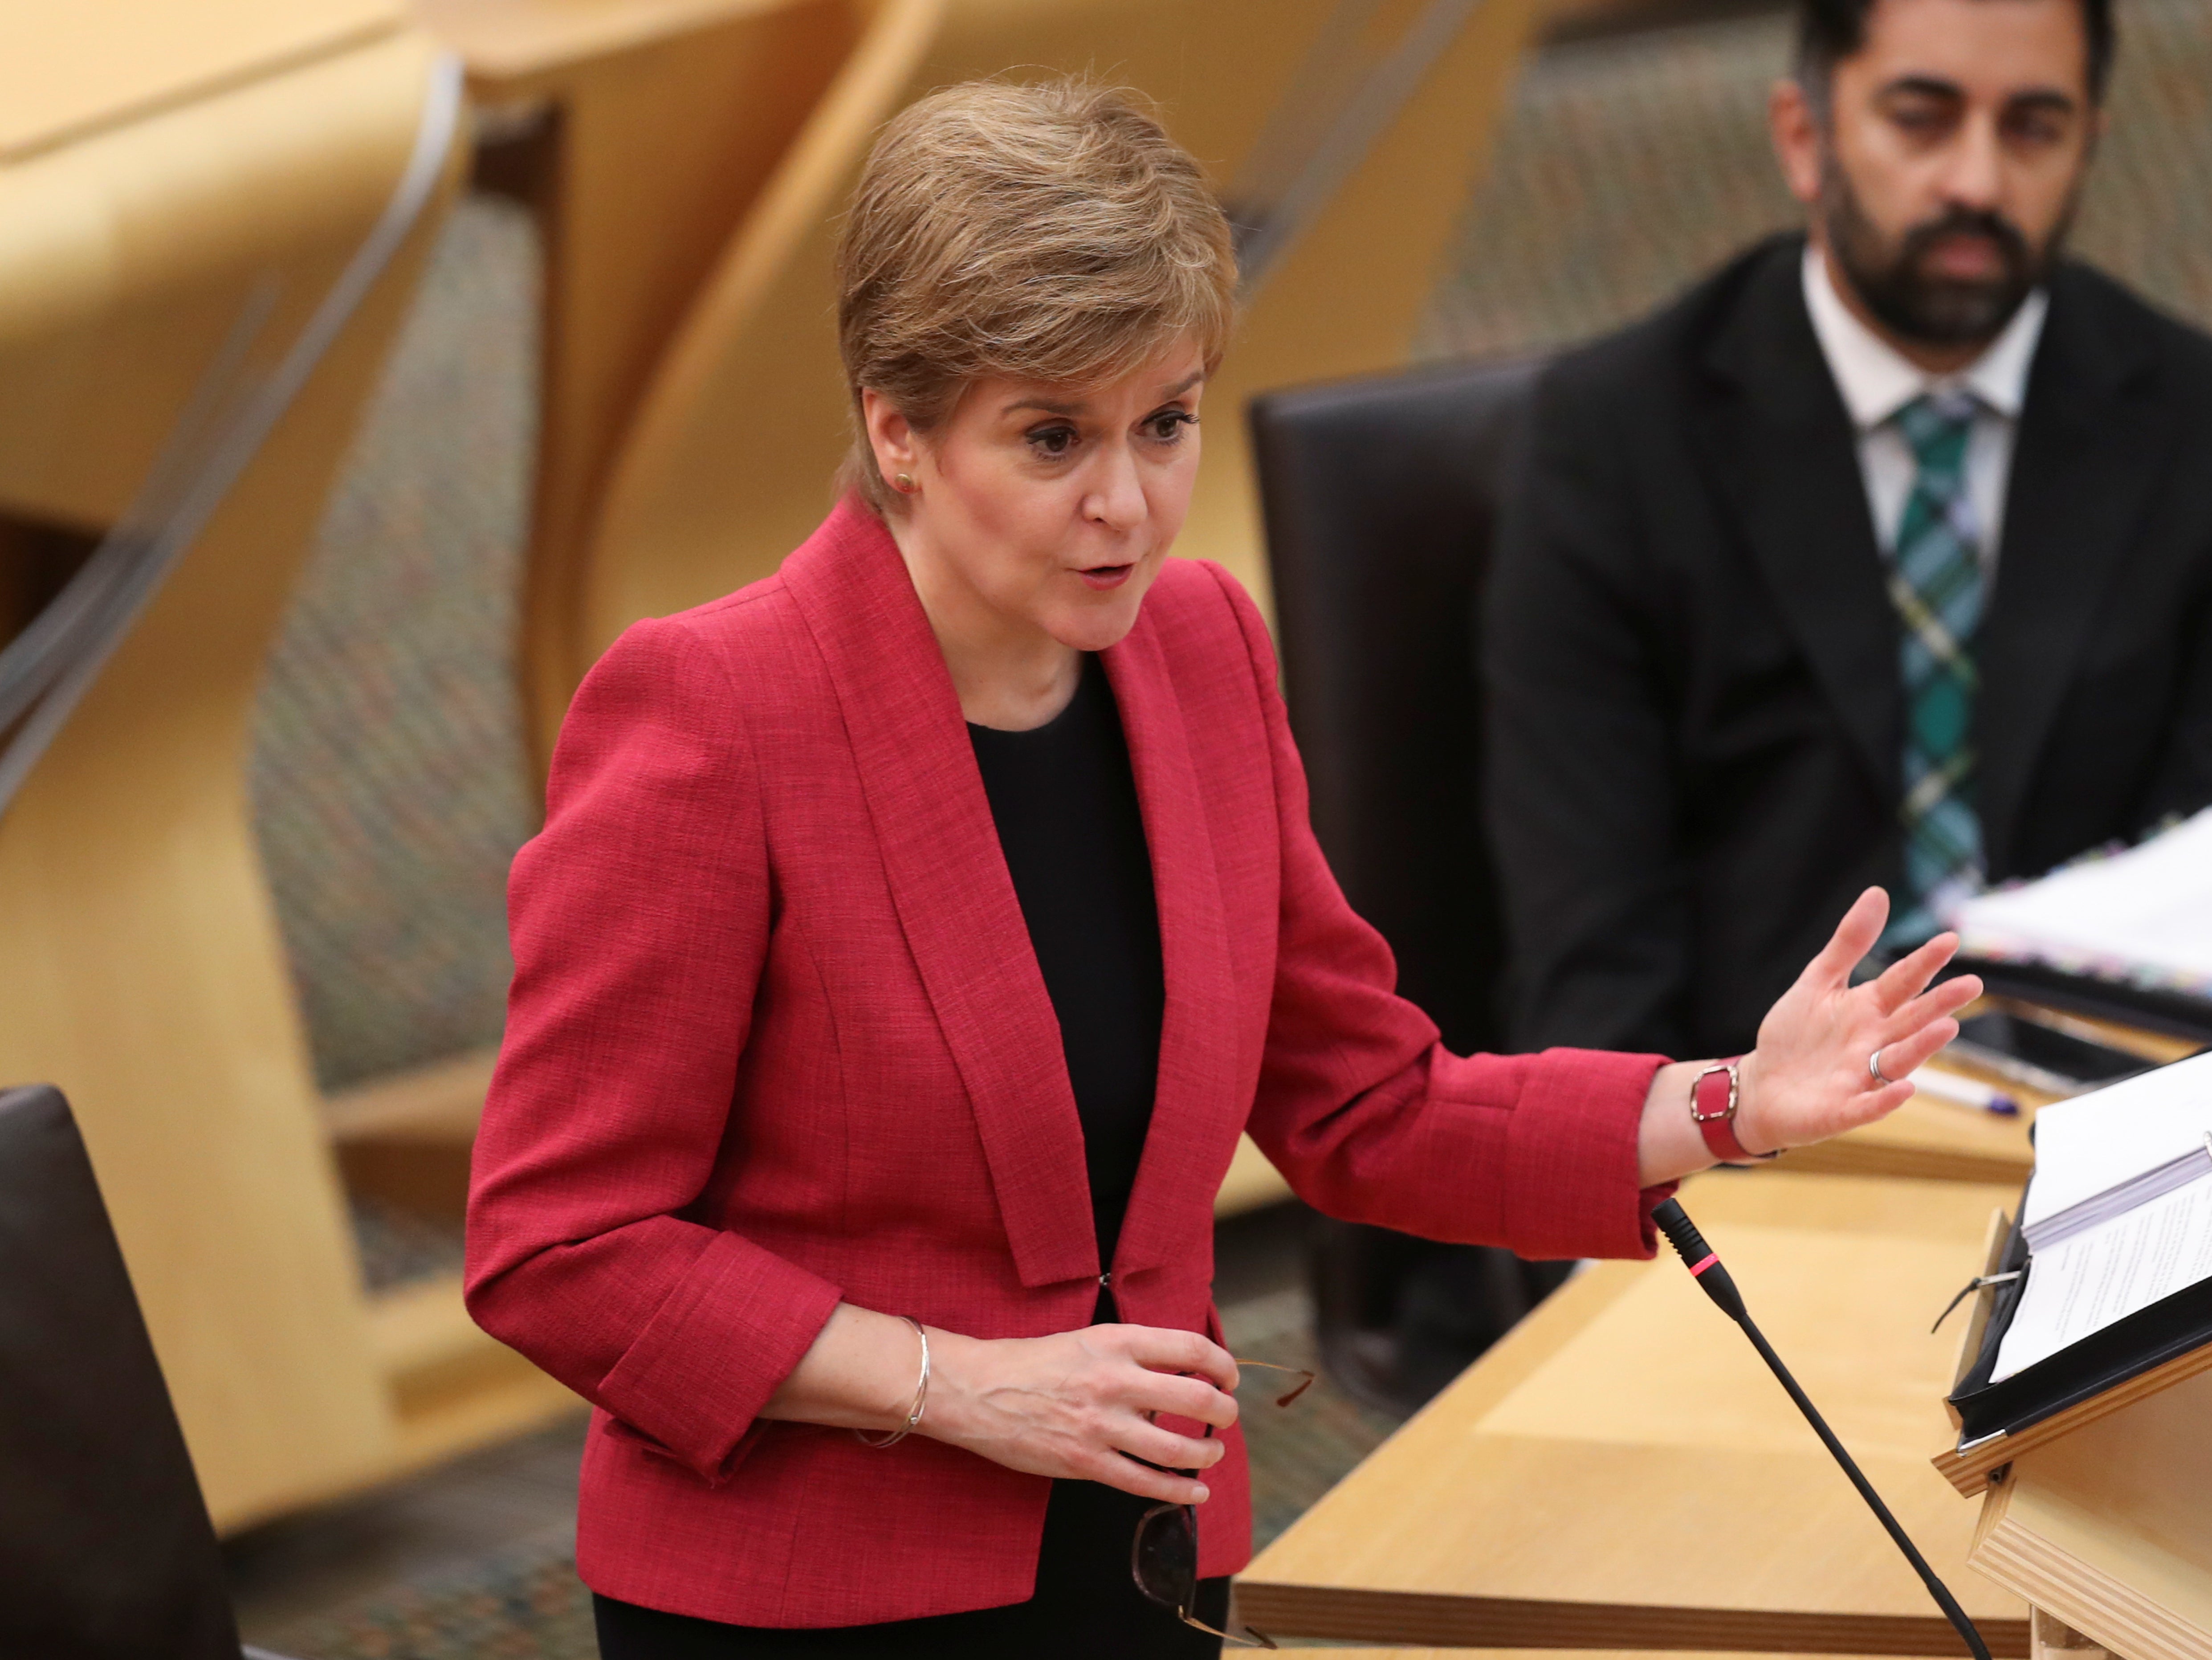 Nicola Sturgeon will conclude the SNP conference on Monday